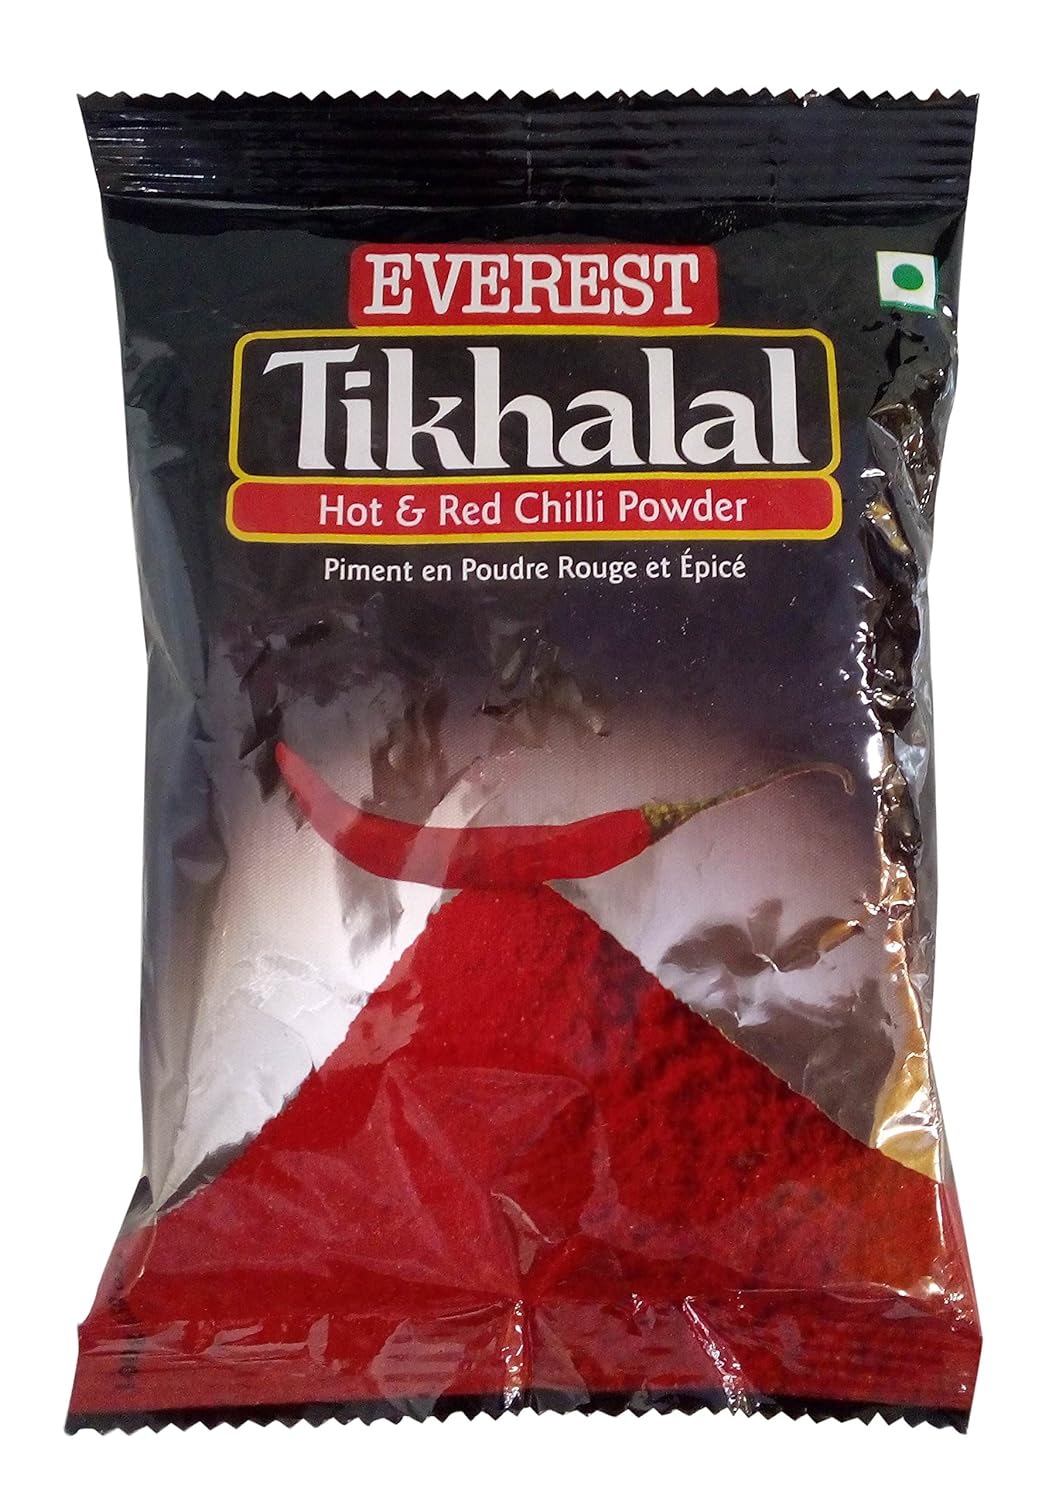 Everest Tikka Lal Hot and Red Chilli powder (100 gm)